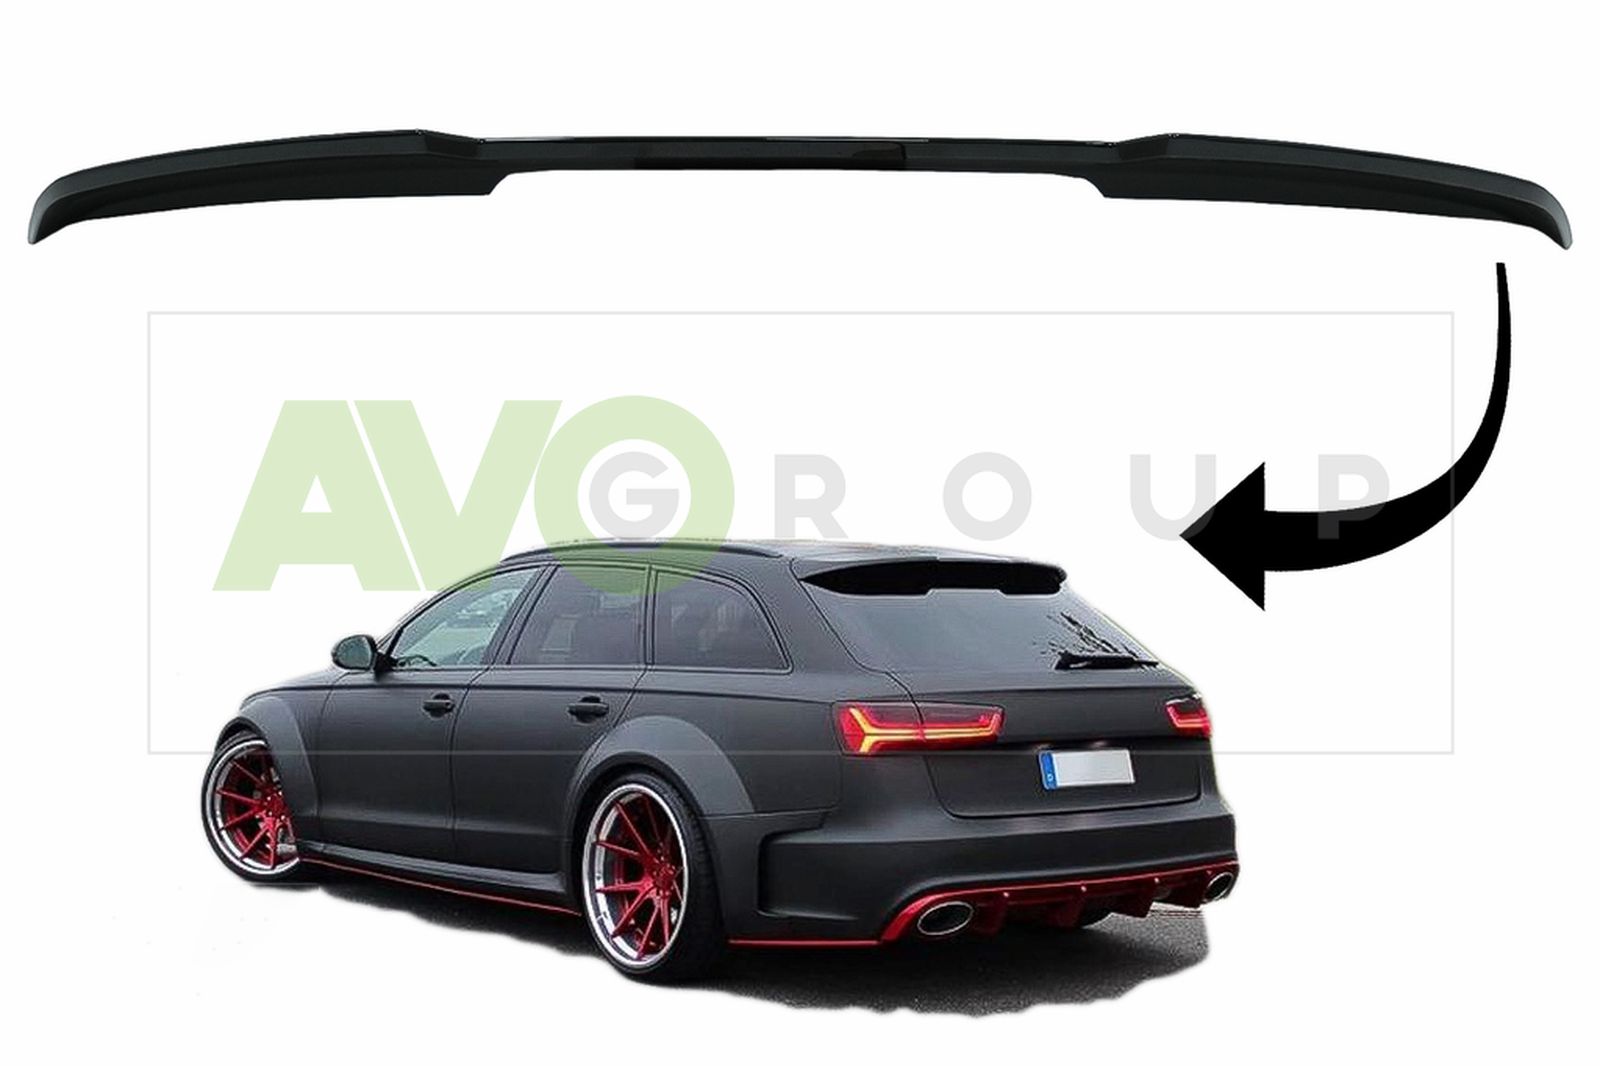 RS style rear trunk roof spoiler for Audi A6 C7 S6 4G Avant 2011-2018 Black gloss